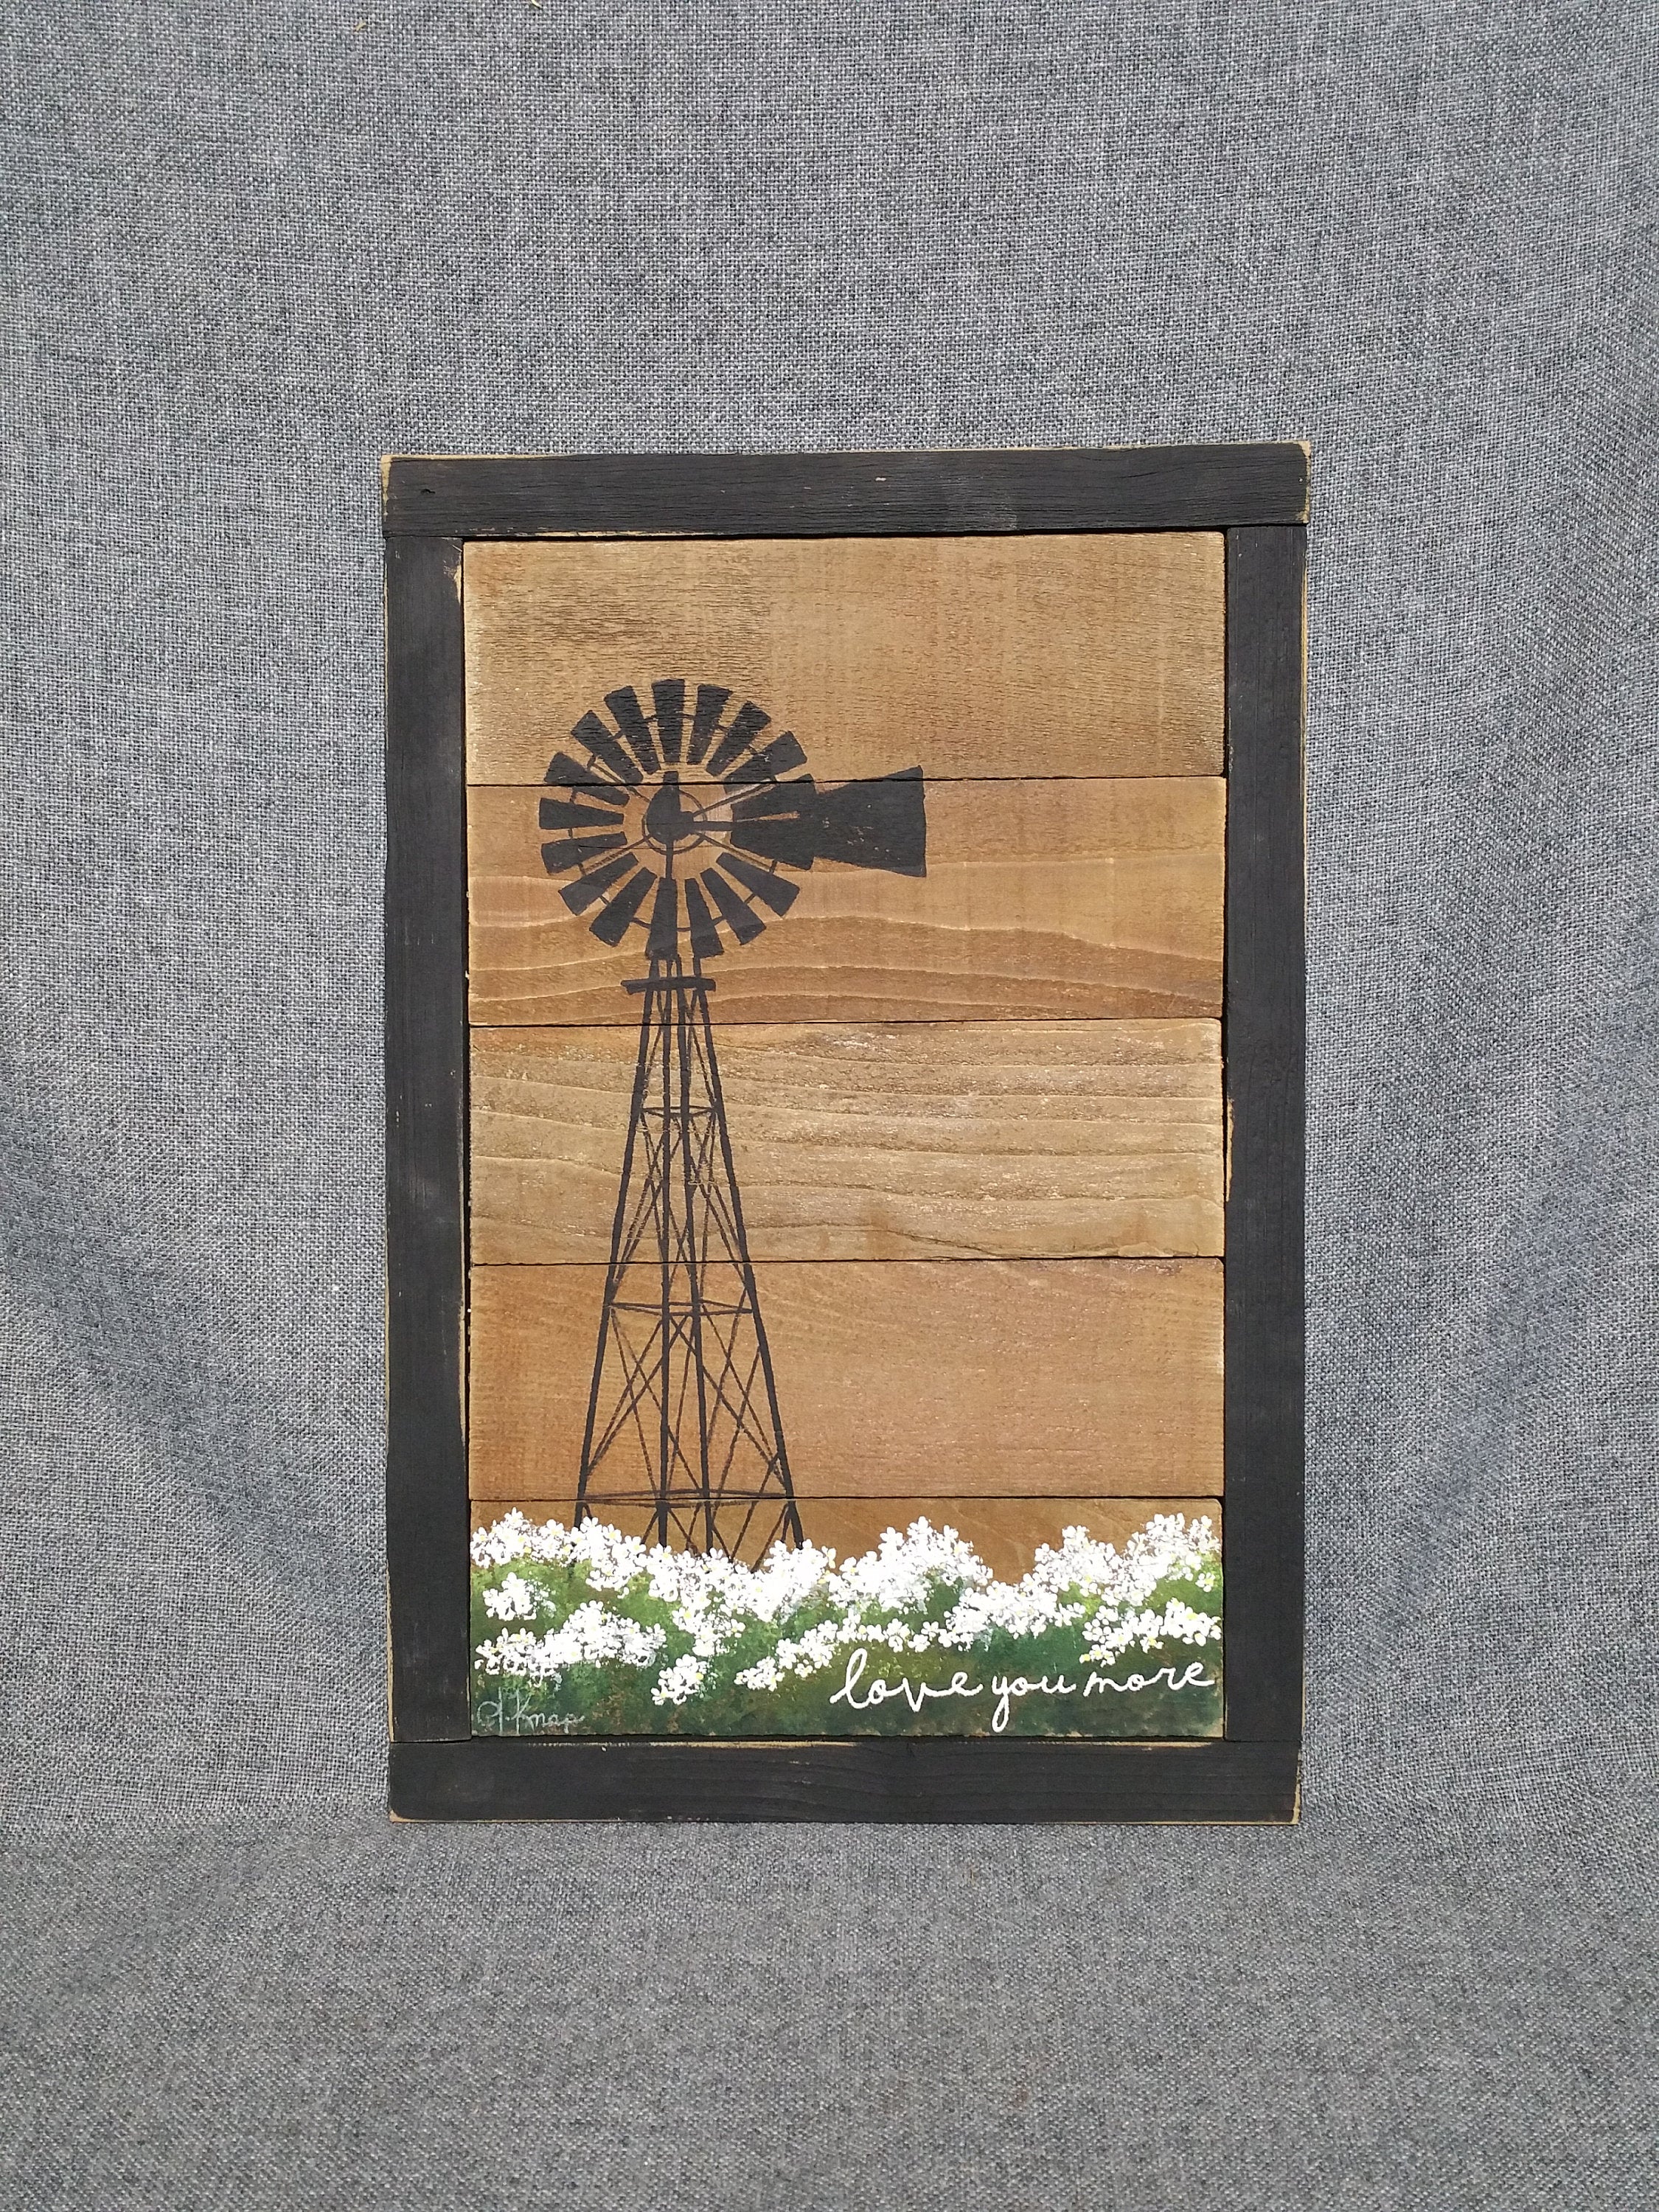 Daisy Pallet Art, hand painted Vintage windmill with "love you more", Farmhouse field of flowers